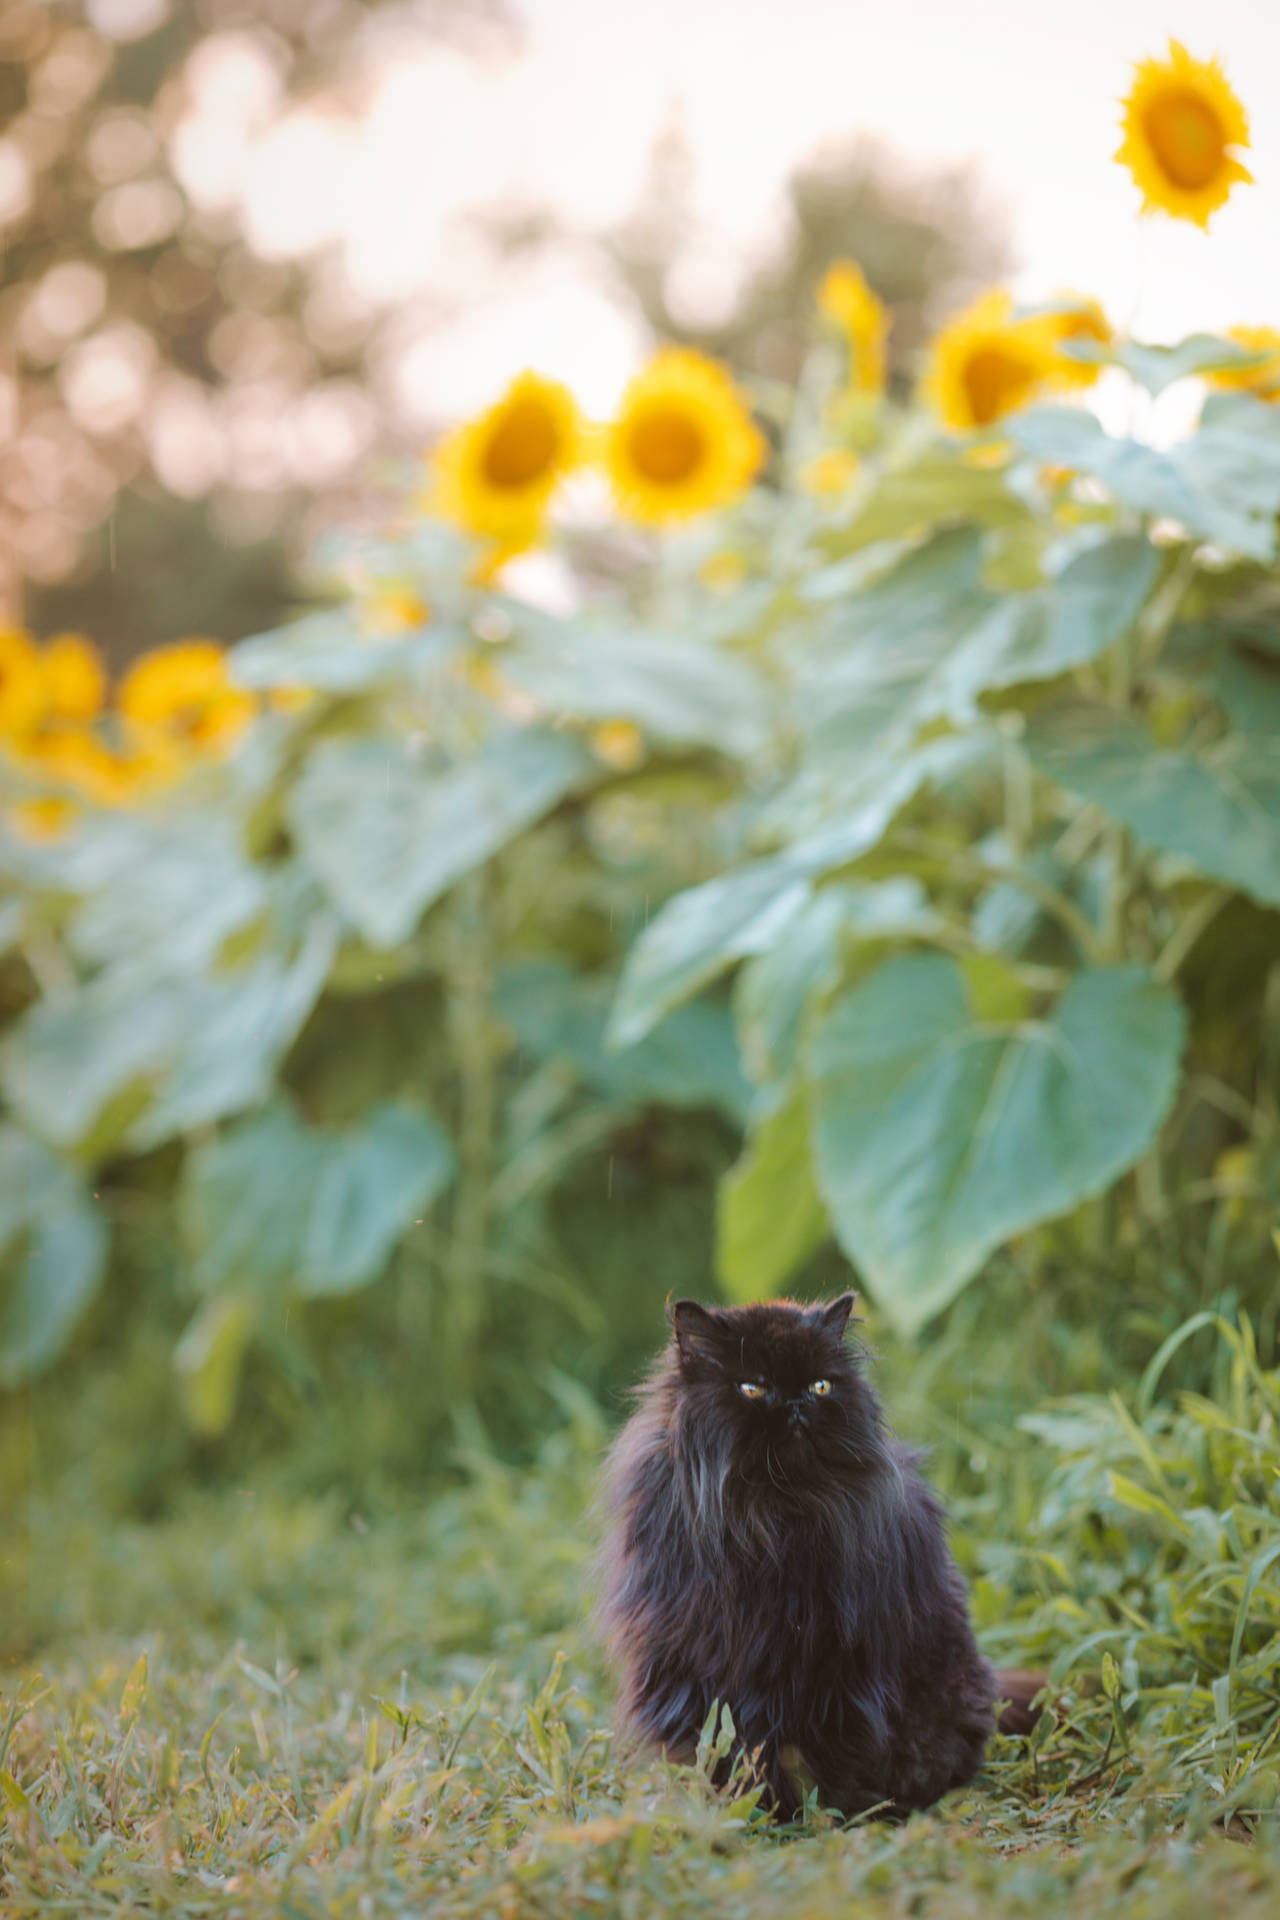 Aesthetic Cat With Sunflowers Background